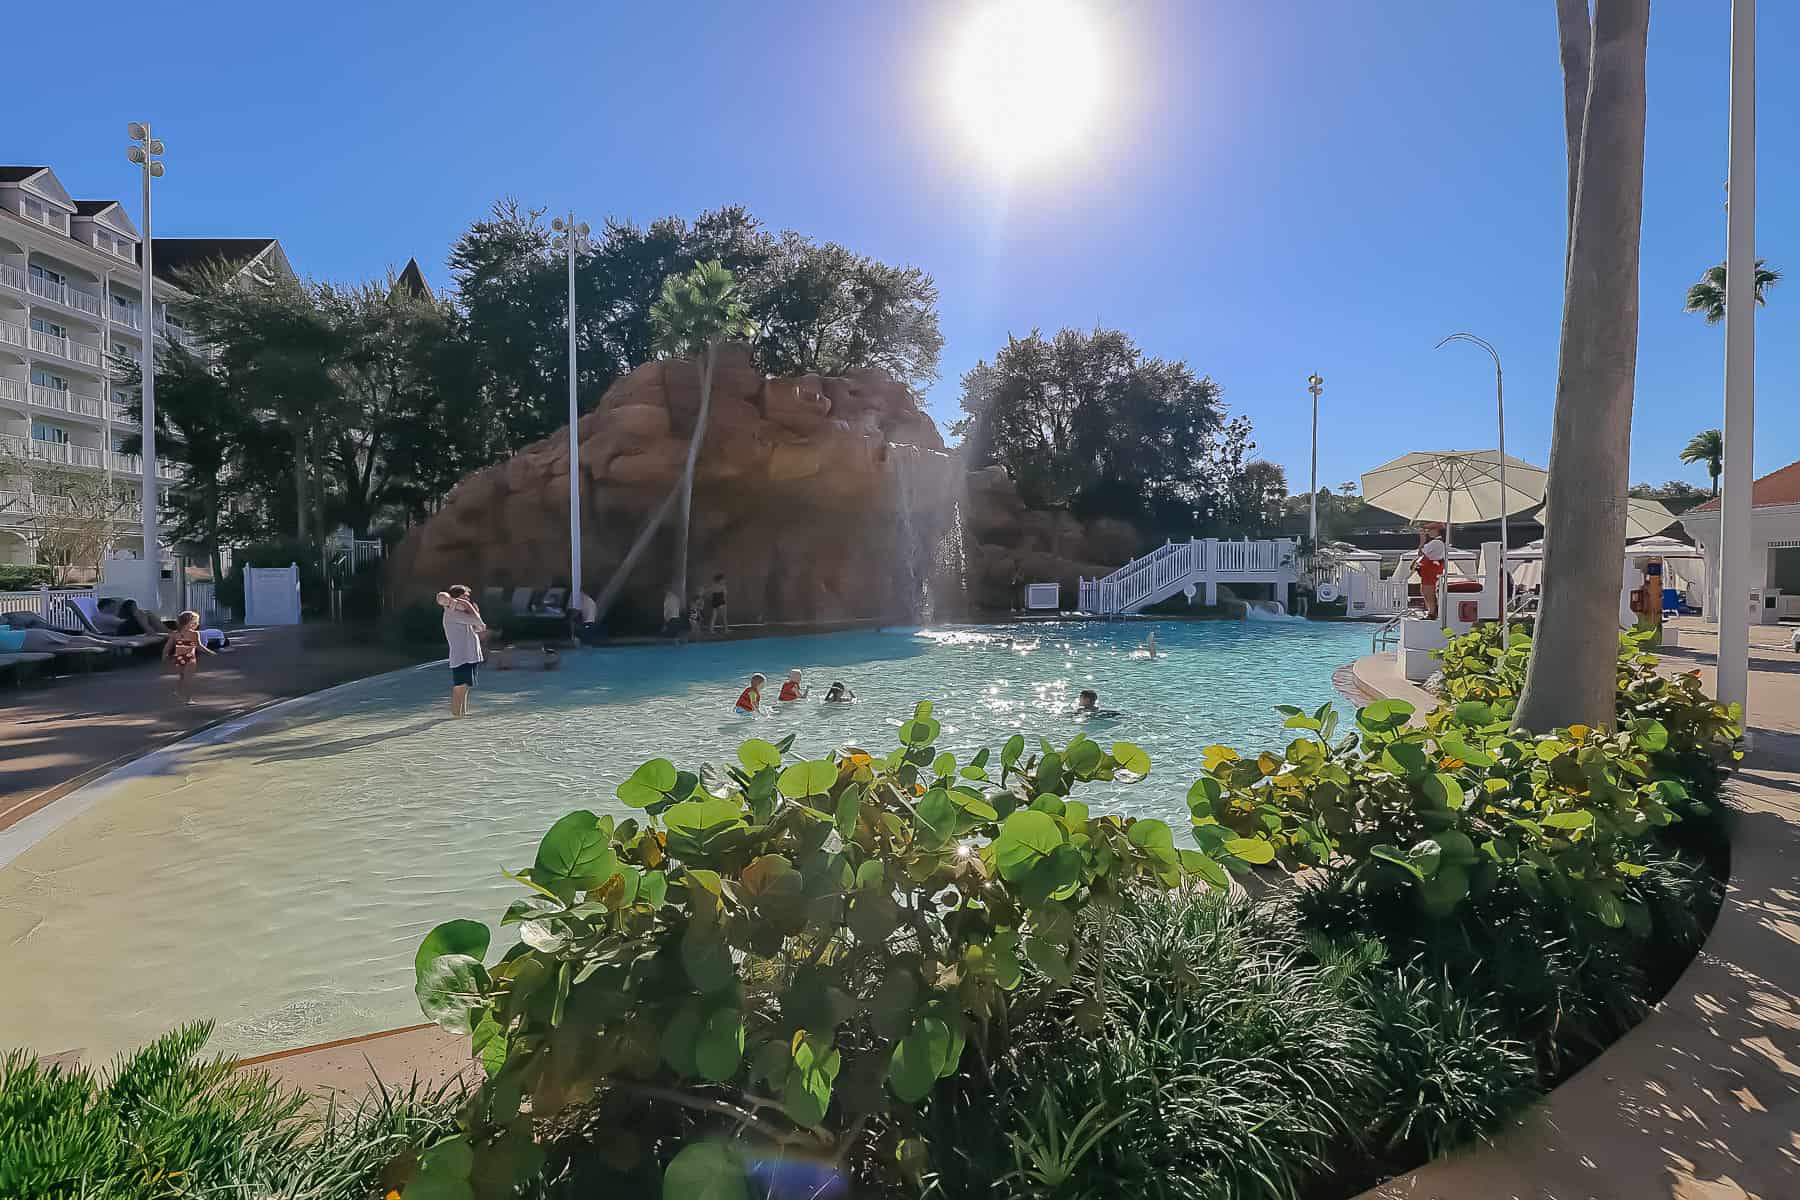 Beach Pool at Disney's Grand Floridian with zero-depth entry 